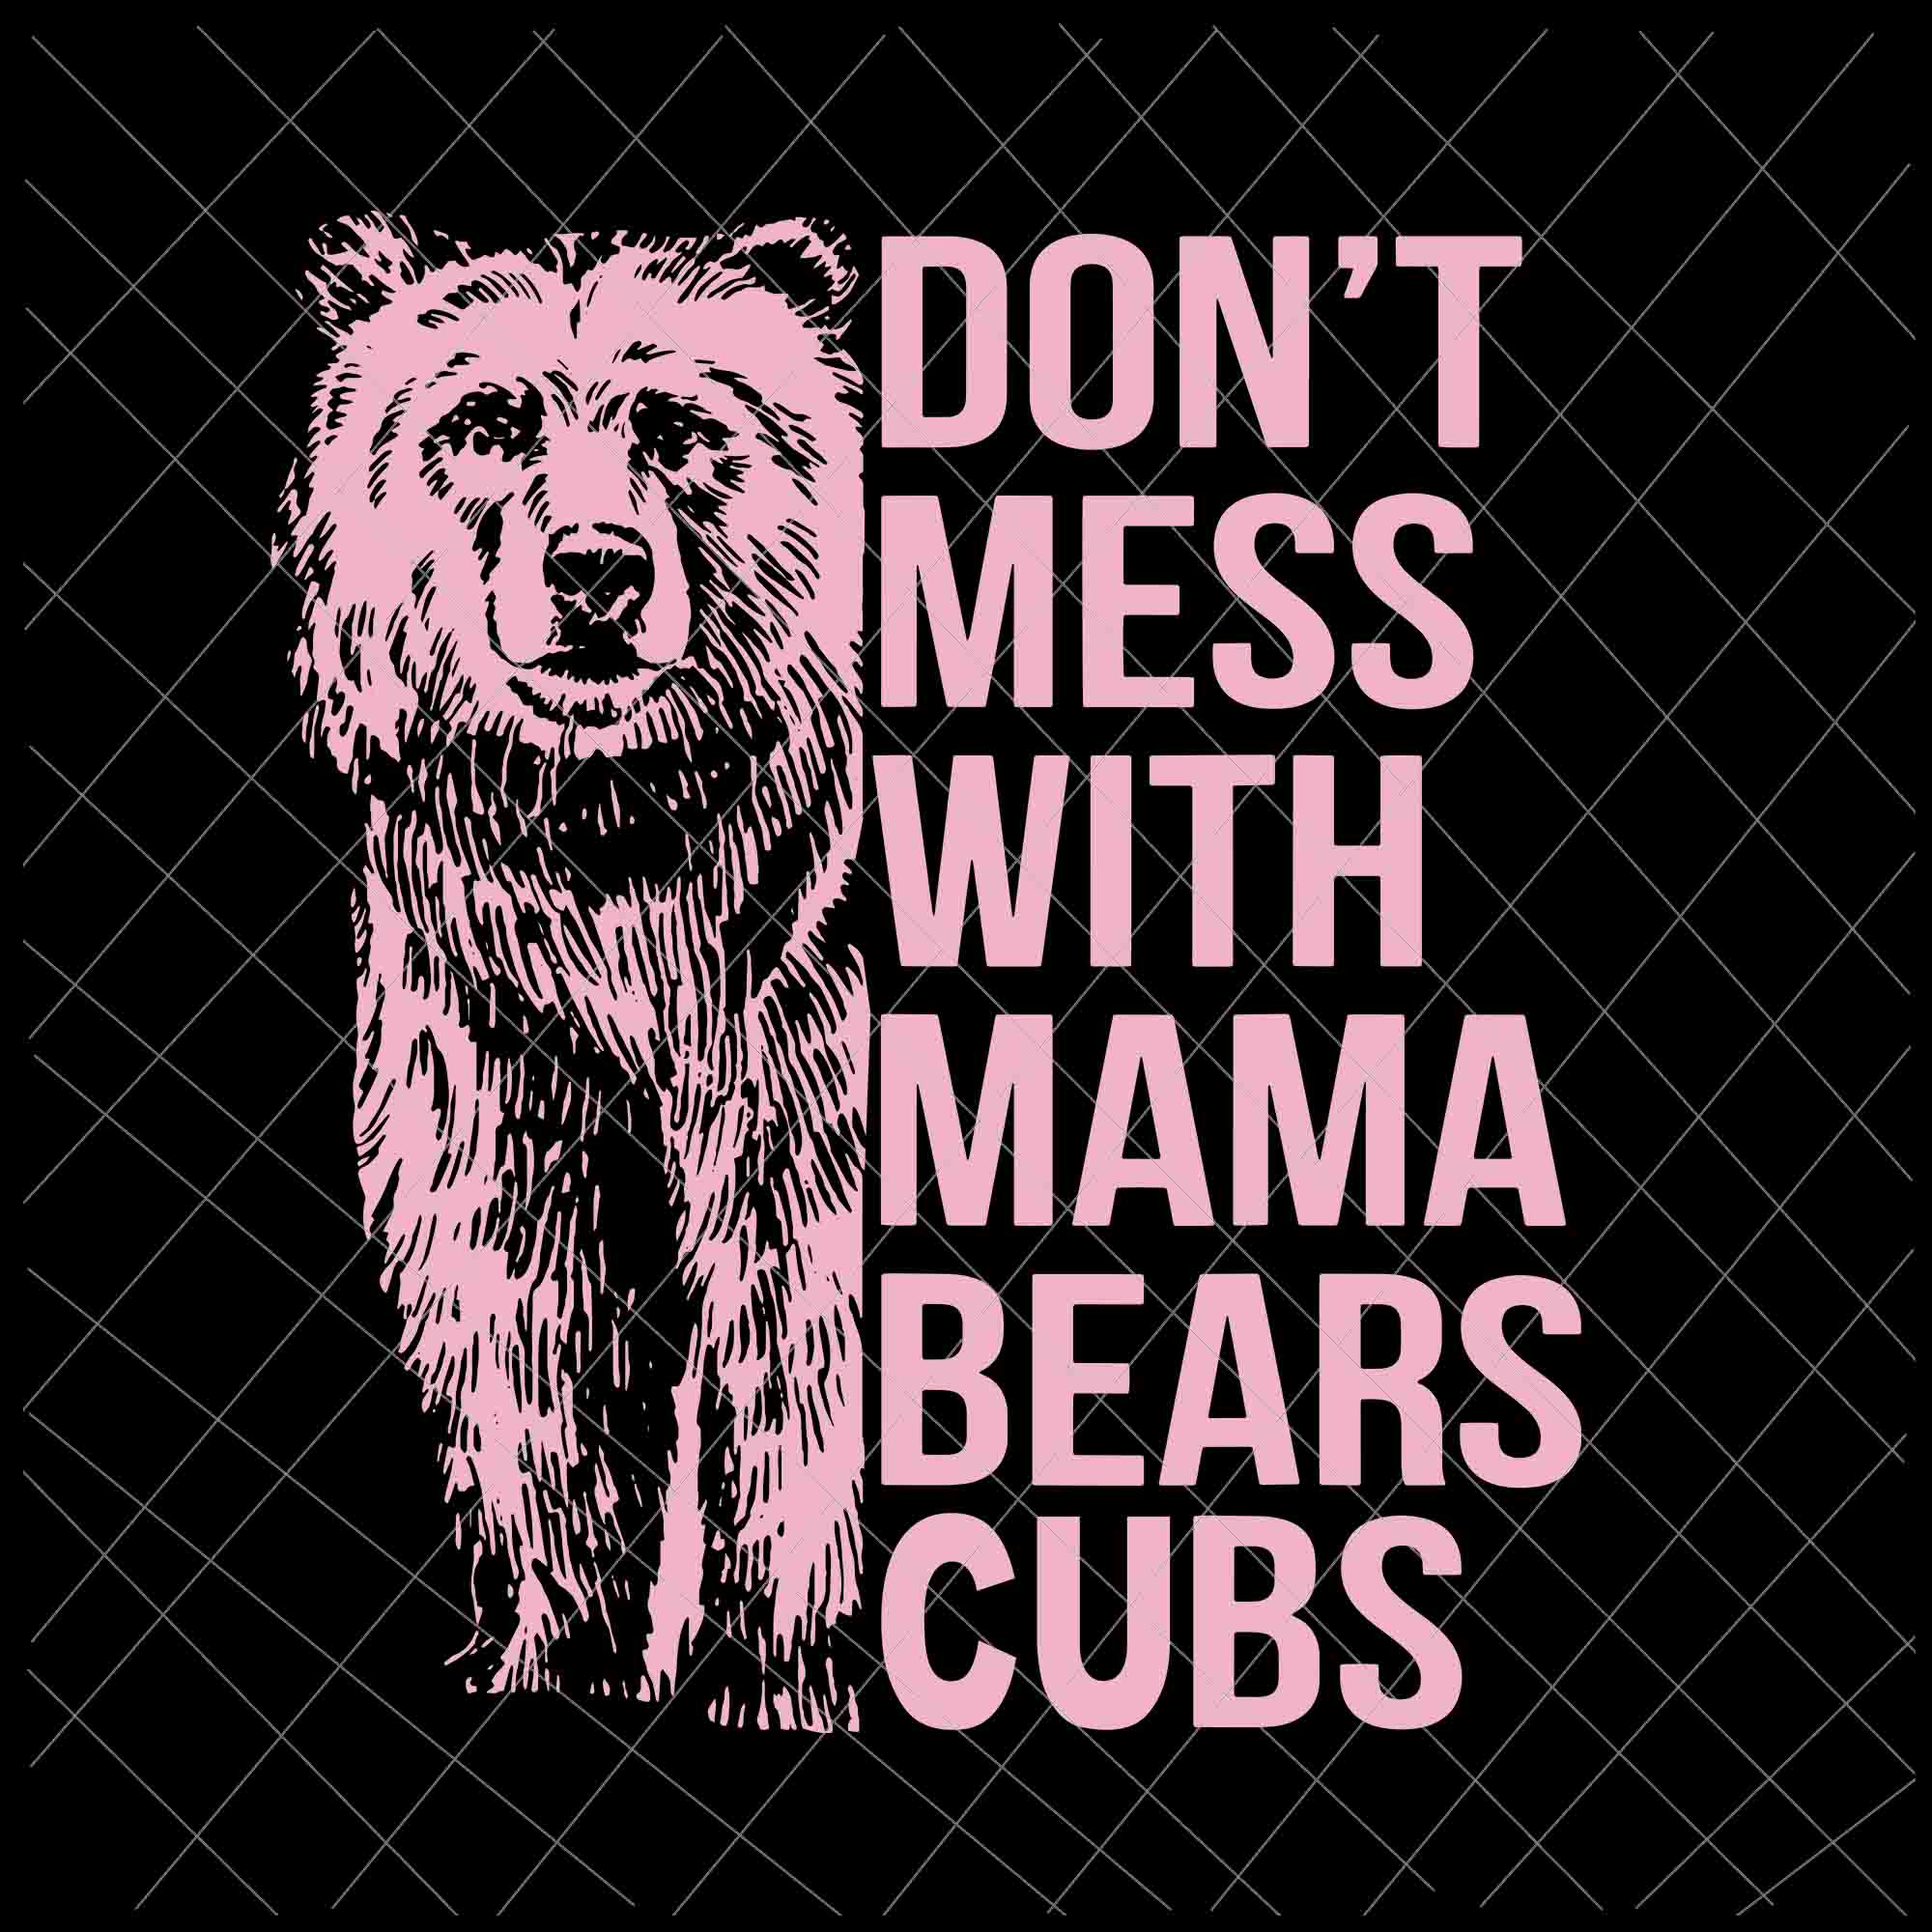 Mama Bear (Mother's Day) SVG